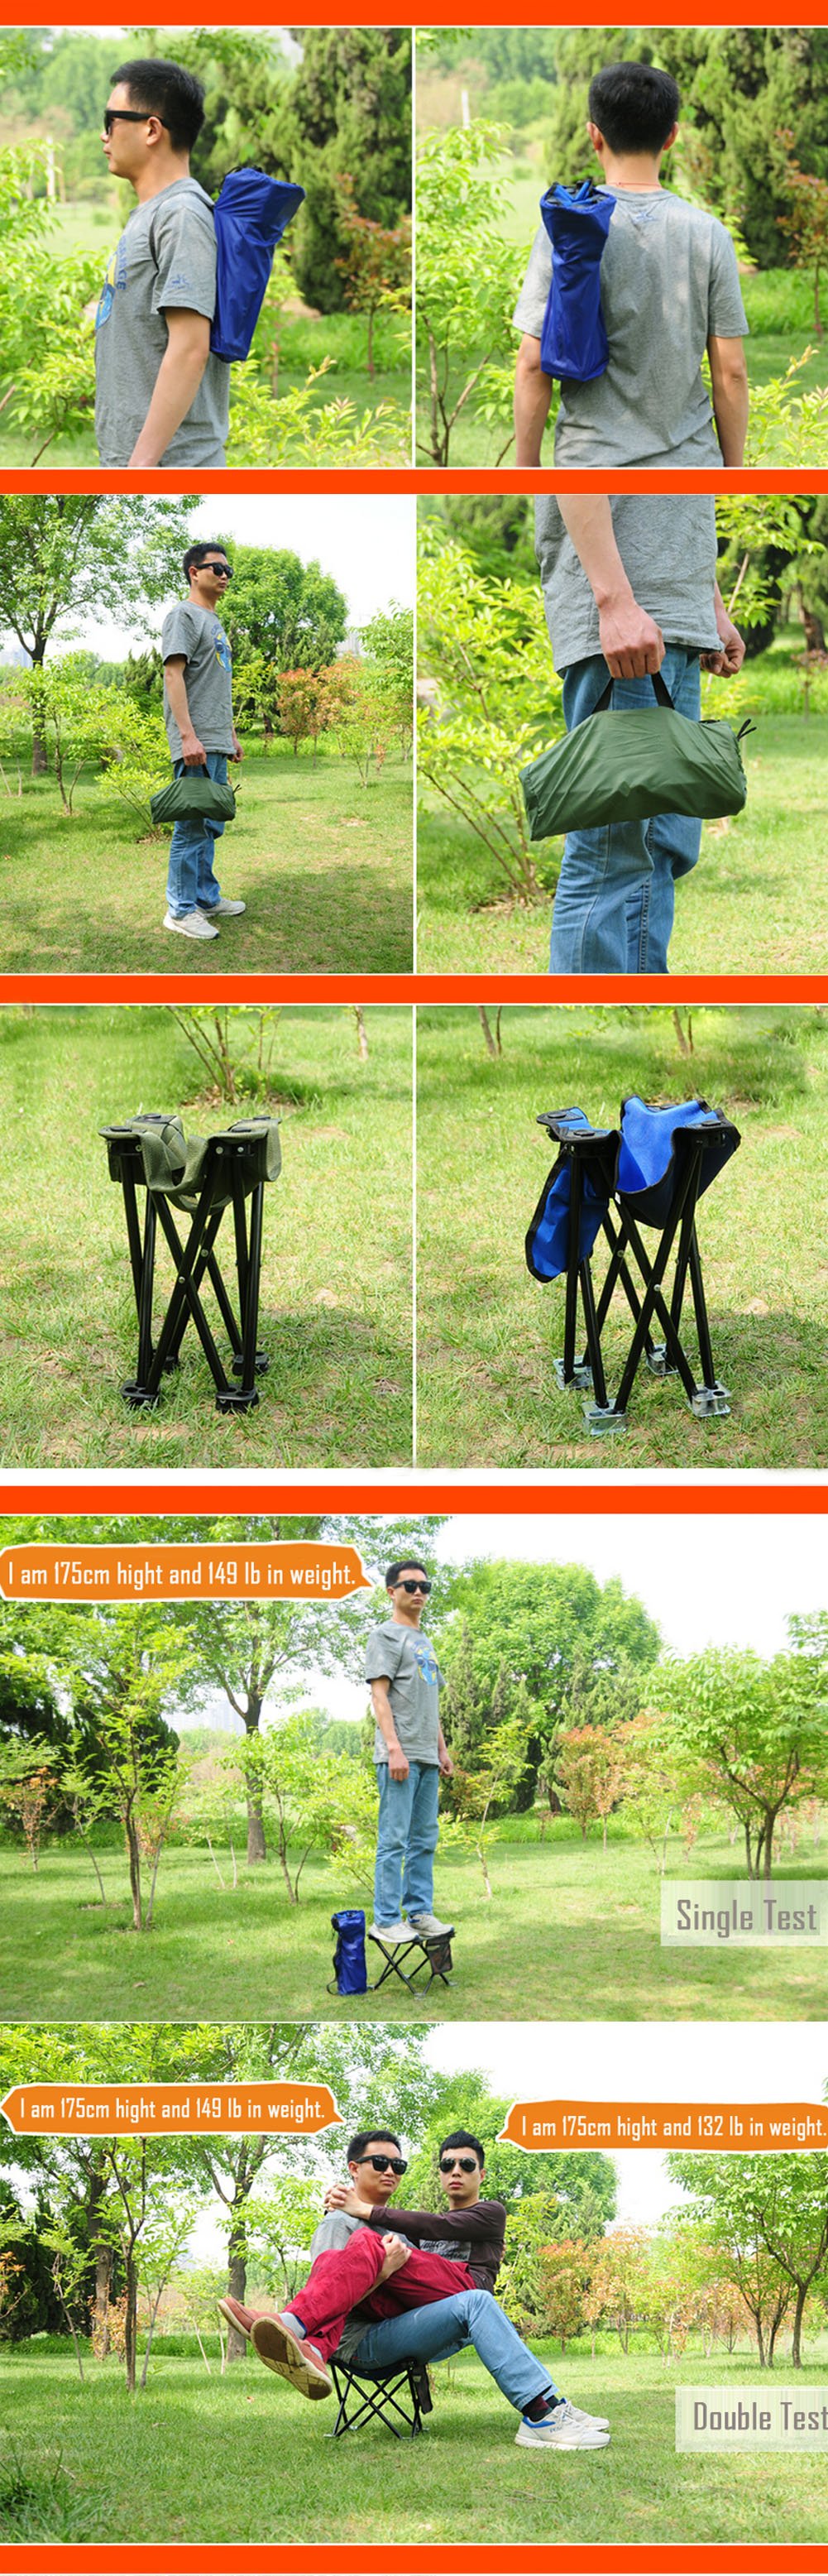 [BLUE] Durable Portable Camping/Fishing/Outdoor Folding Chair with Pocket??Small - image 2 of 2